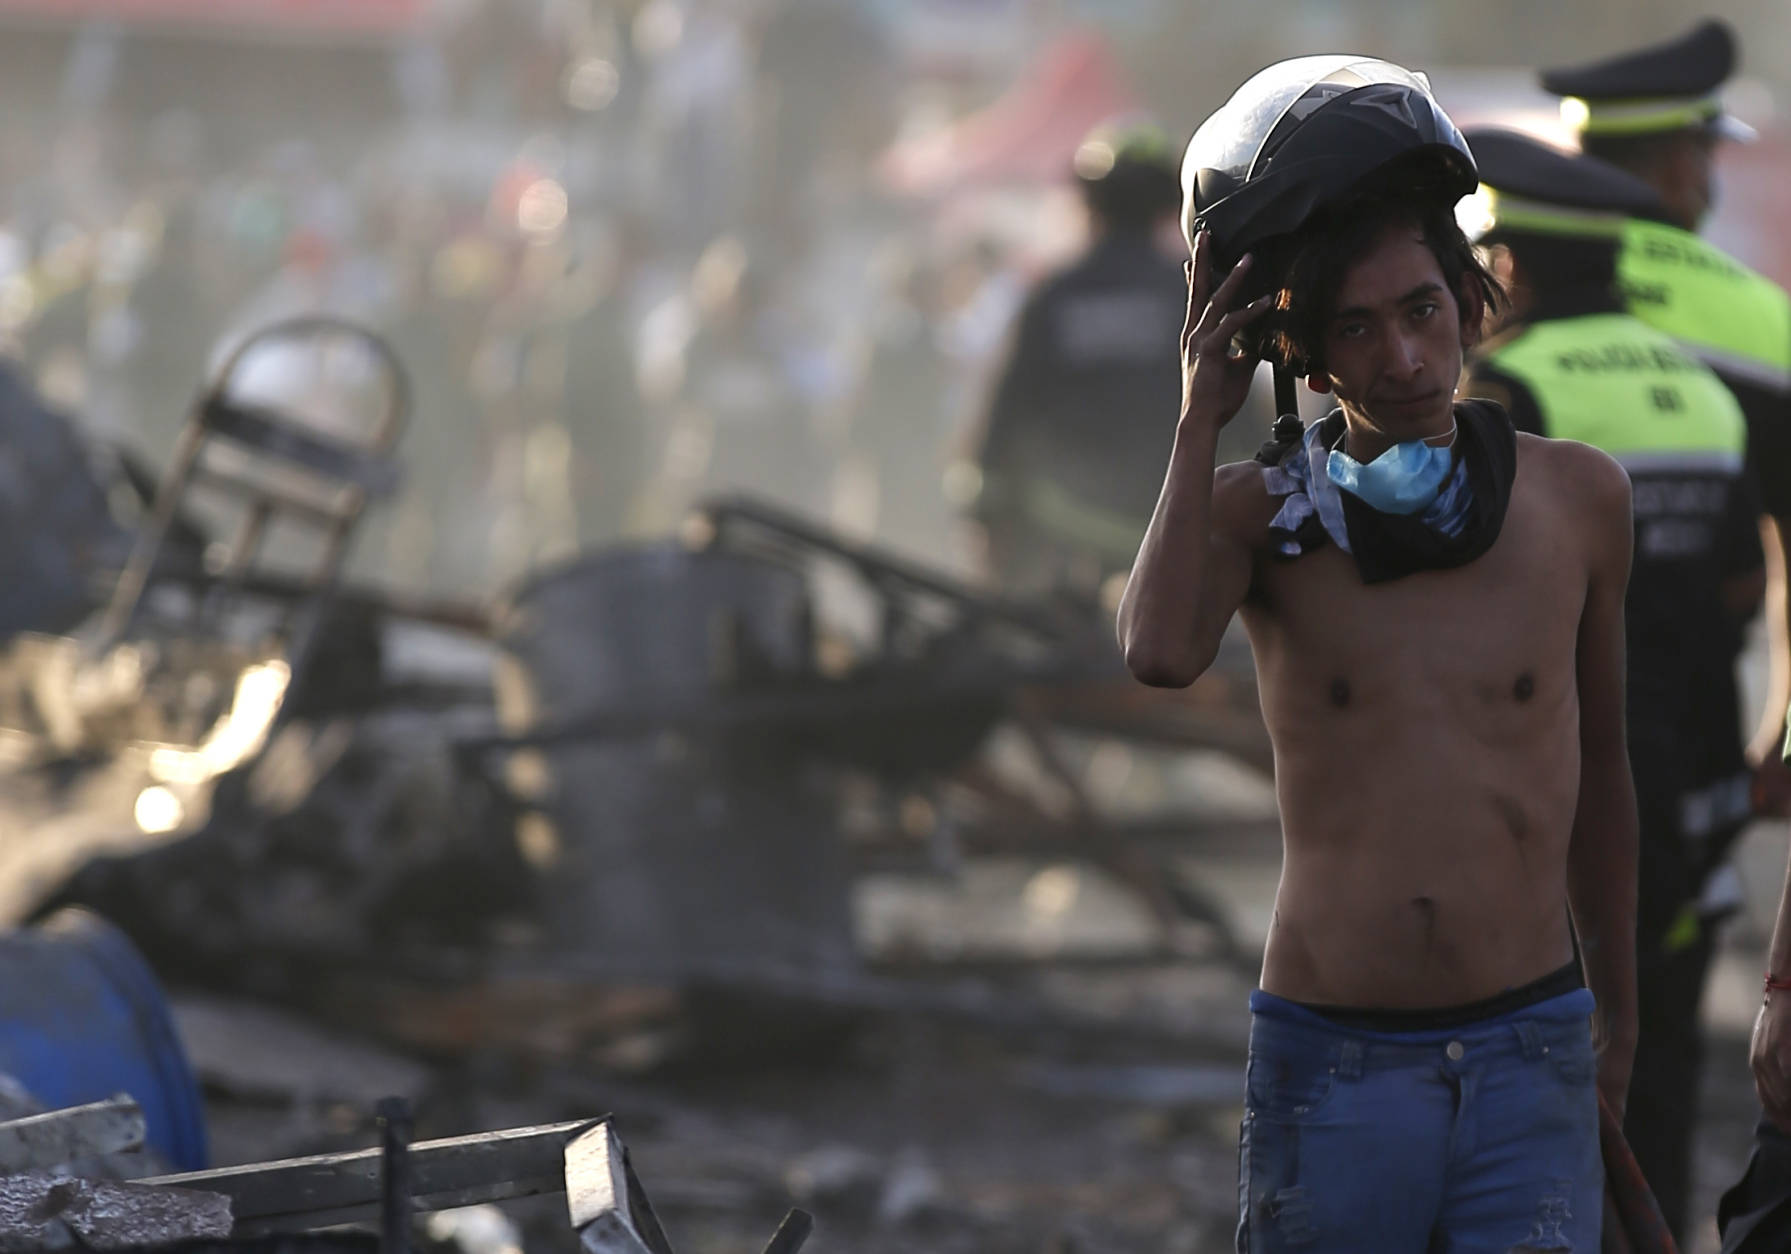 A boy takes his helmet off as he pauses while working at the scorched ground of the open-air San Pablito fireworks market, in Tultepec, outskirts of Mexico City, Mexico, Tuesday, Dec. 20, 2016.  An explosion ripped through Mexico’s best-known fireworks market on the northern outskirts of the capital Tuesday, injuring scores and killing at least 9 people , according to Mexican Federal Police. (AP Photo/Eduardo Verdugo)